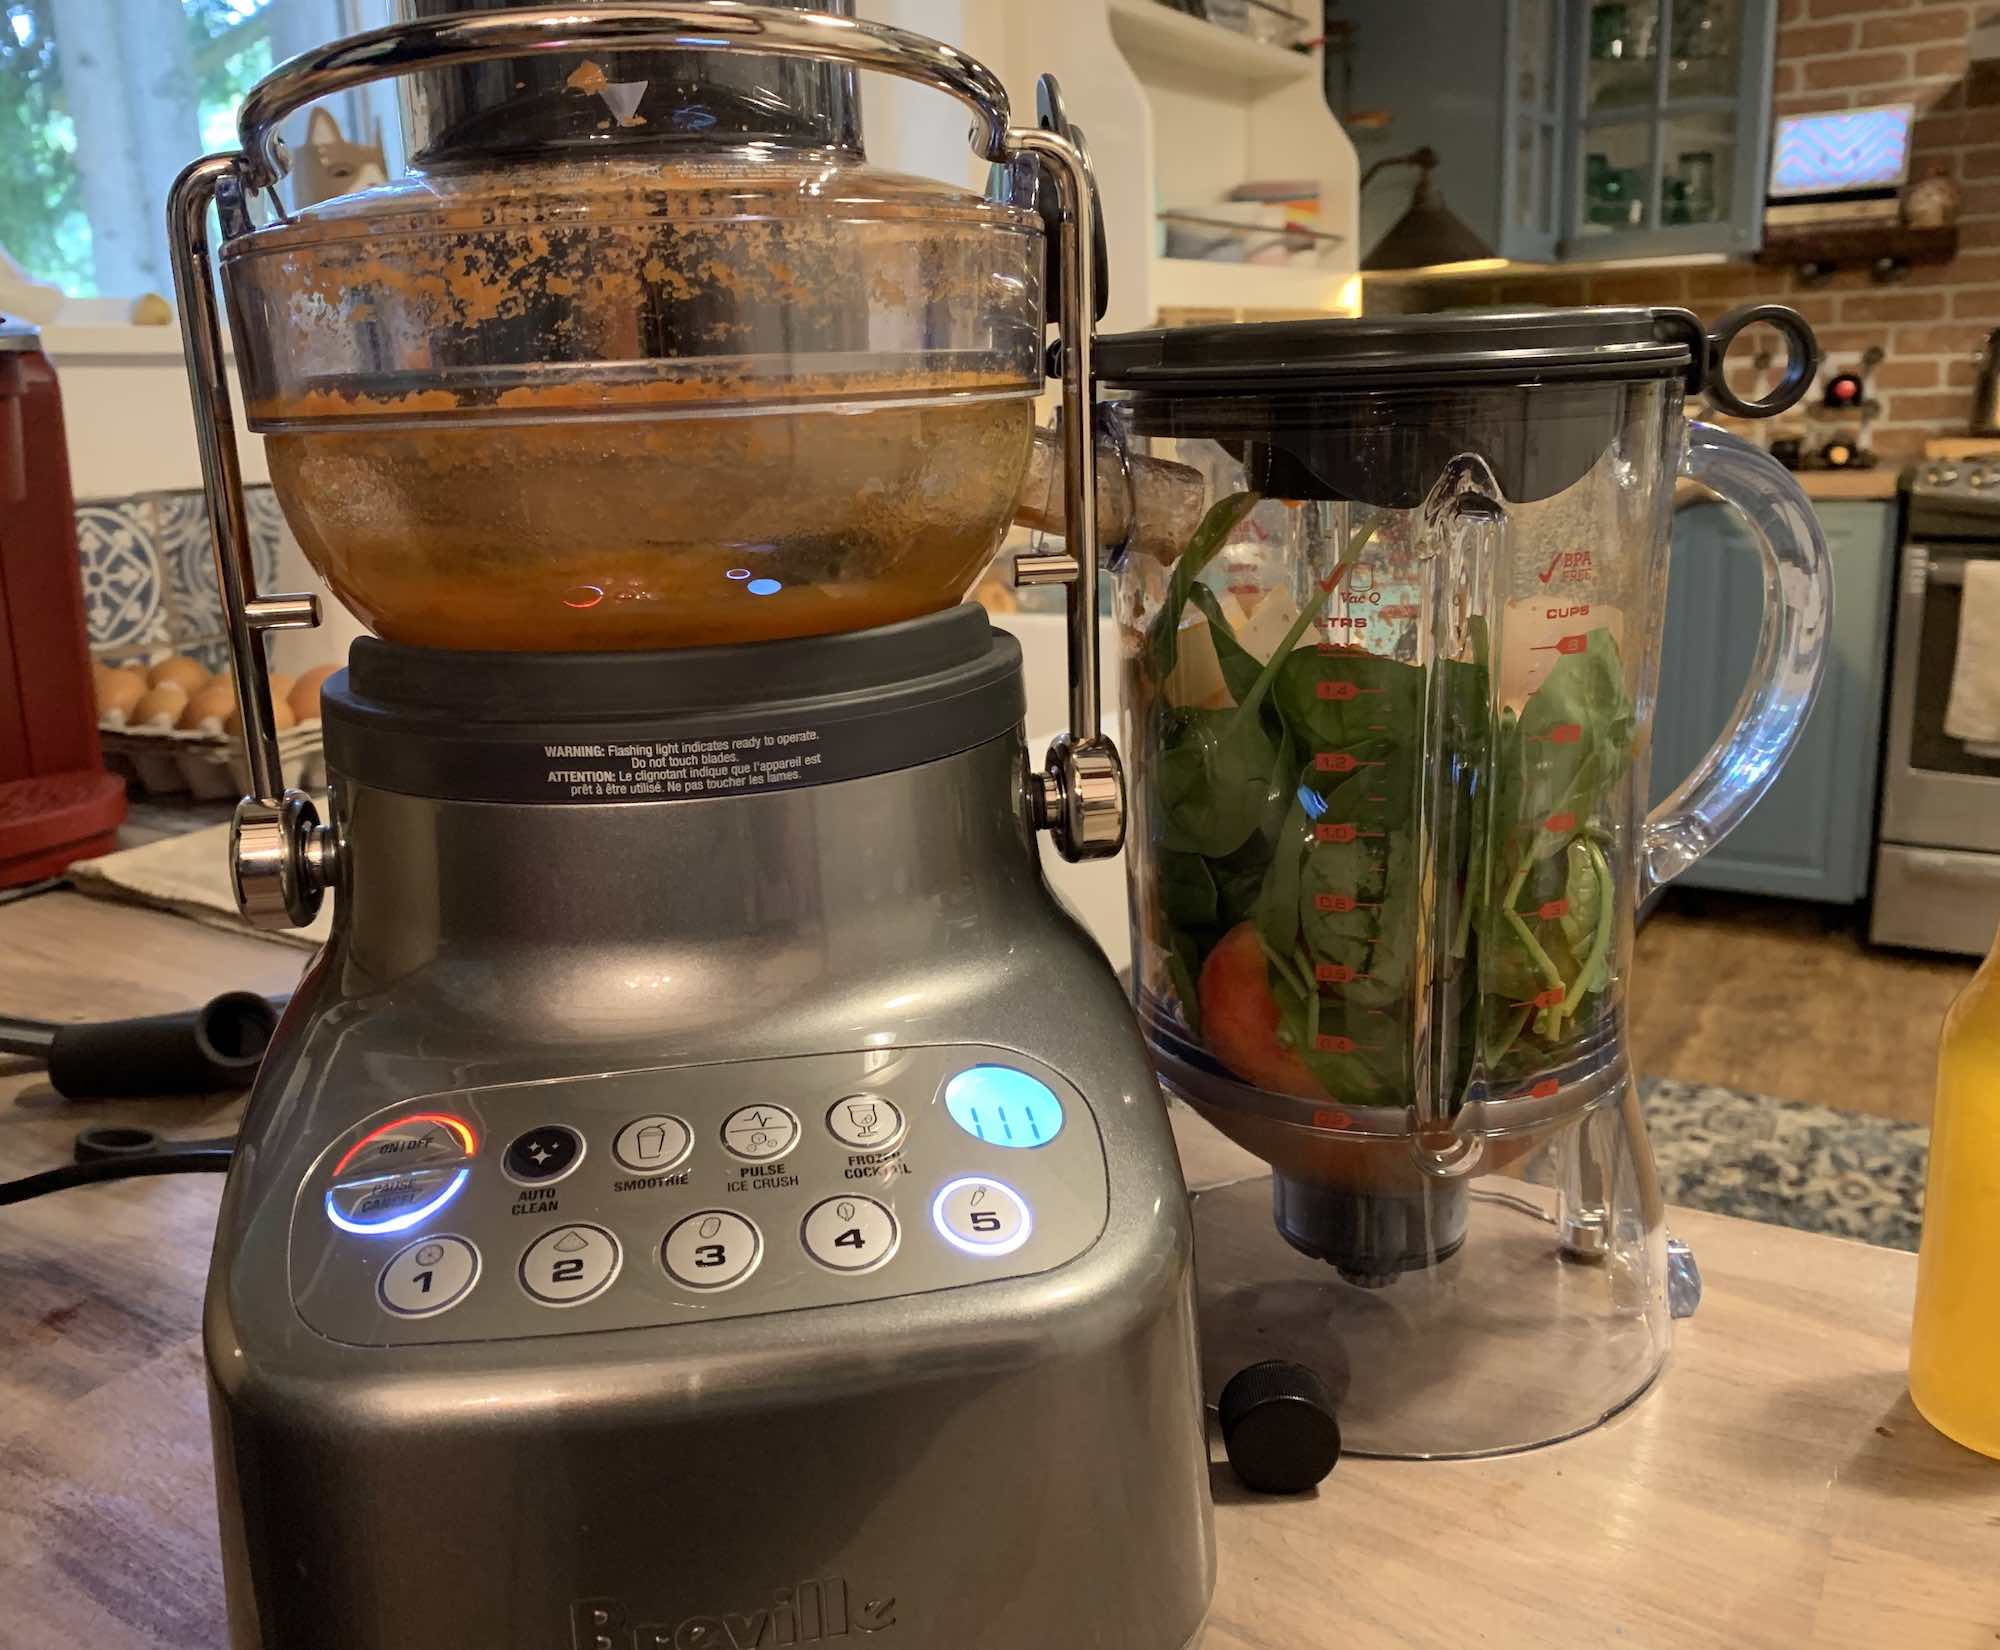 As a multifunction appliance, Bluicers combine juicing and blending.